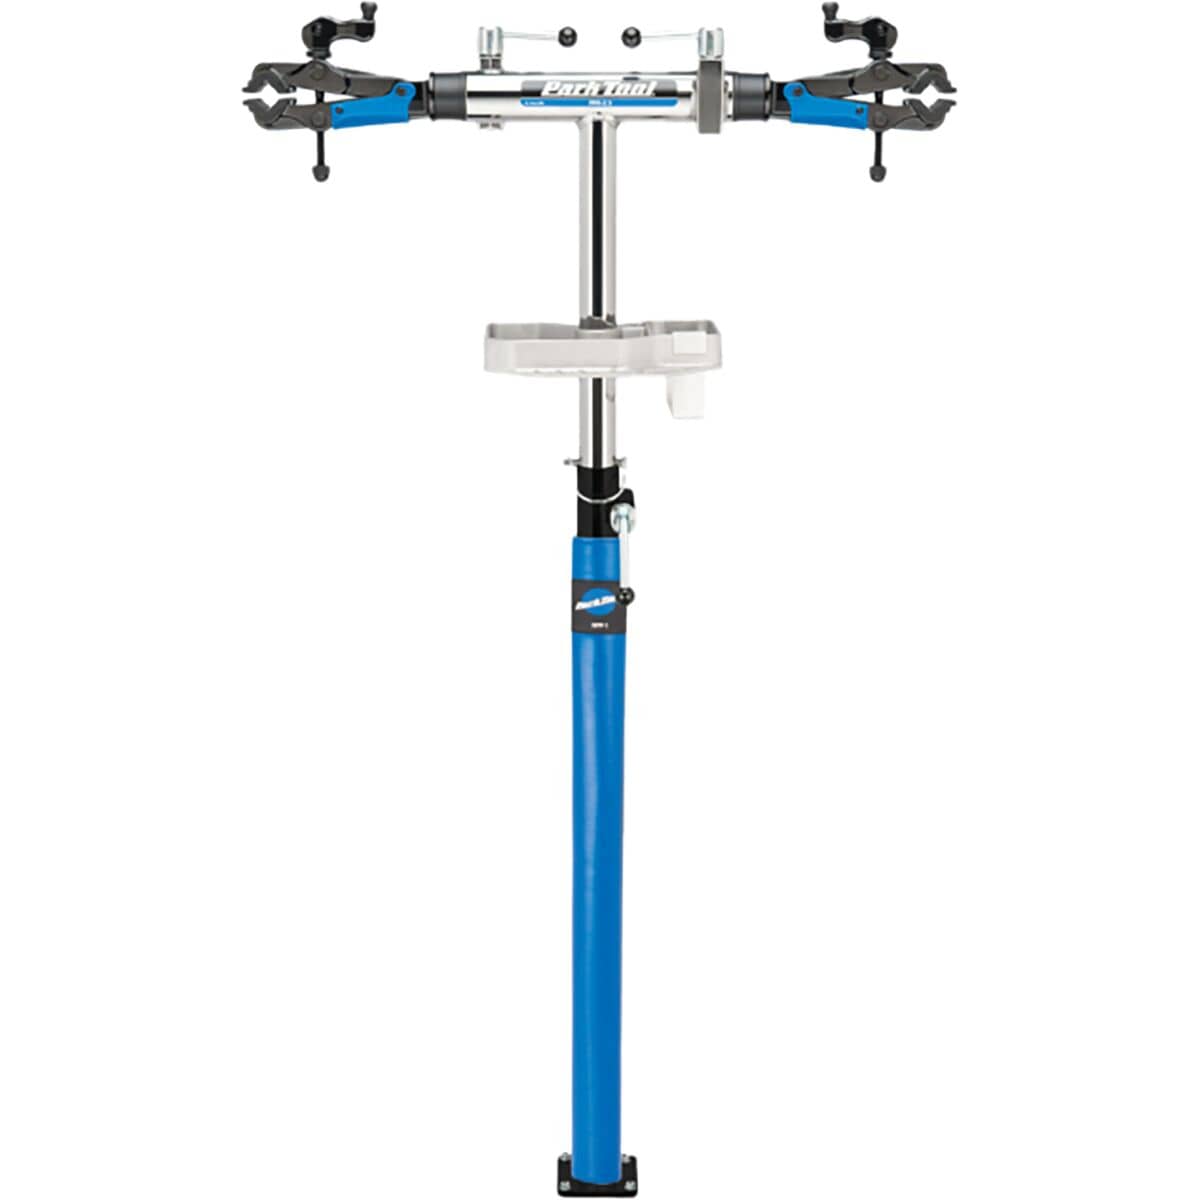 Park Tool PRS-2.3 Deluxe Double Arm Repair Stand PRS-2.3-2, 100-3D Micro-Adjust Clamps